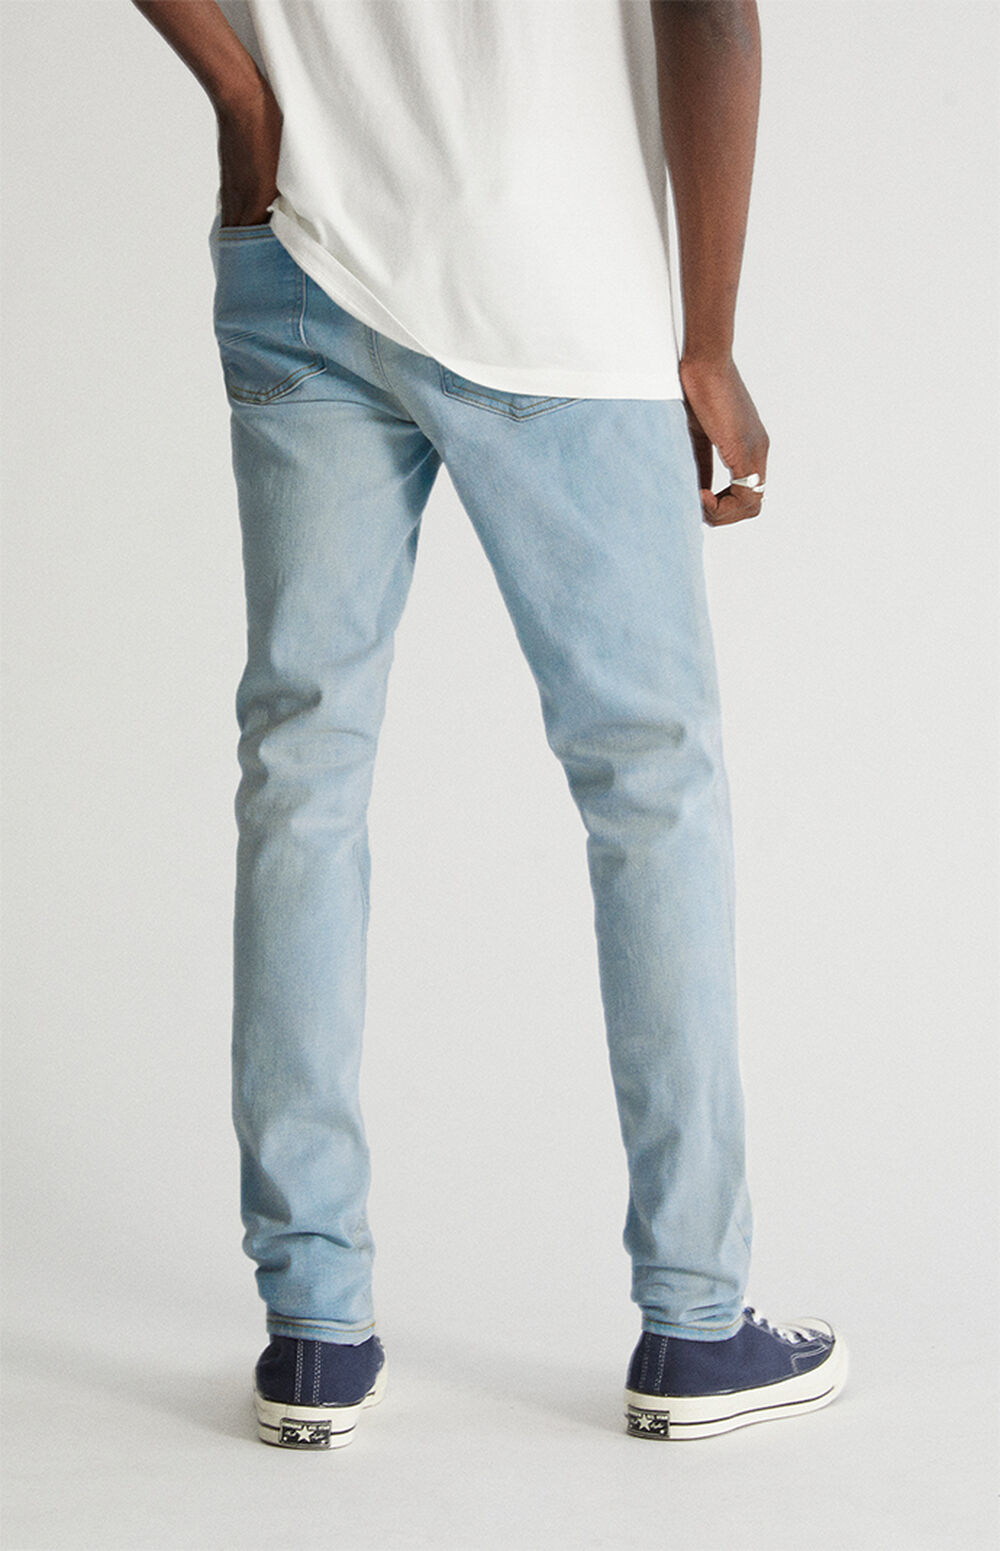 PacSun Light Stacked Skinny Jeans | PacSun